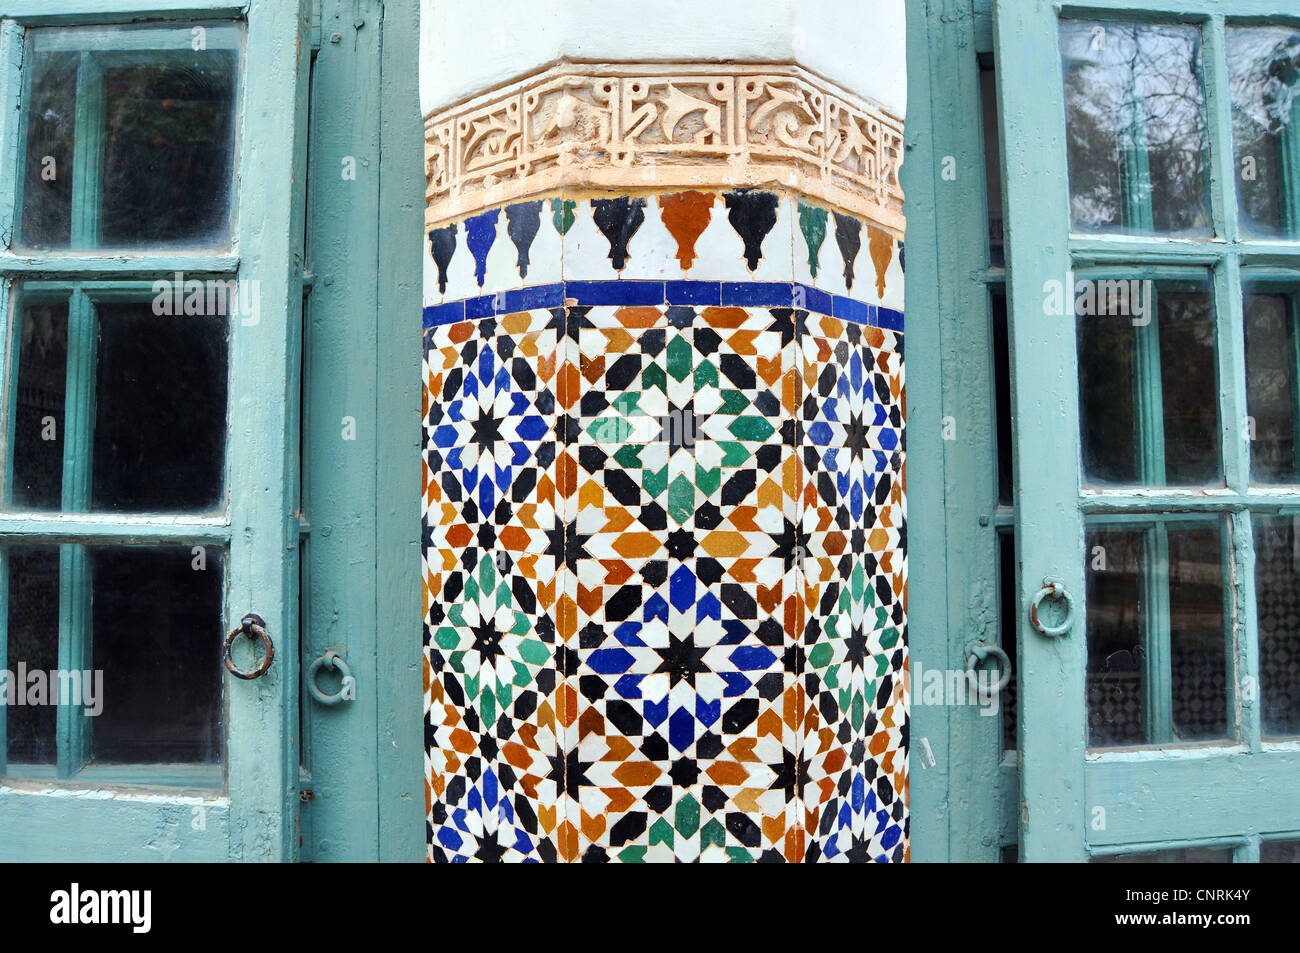 Moroccan tiles and painted doors, Marrakech Stock Photo